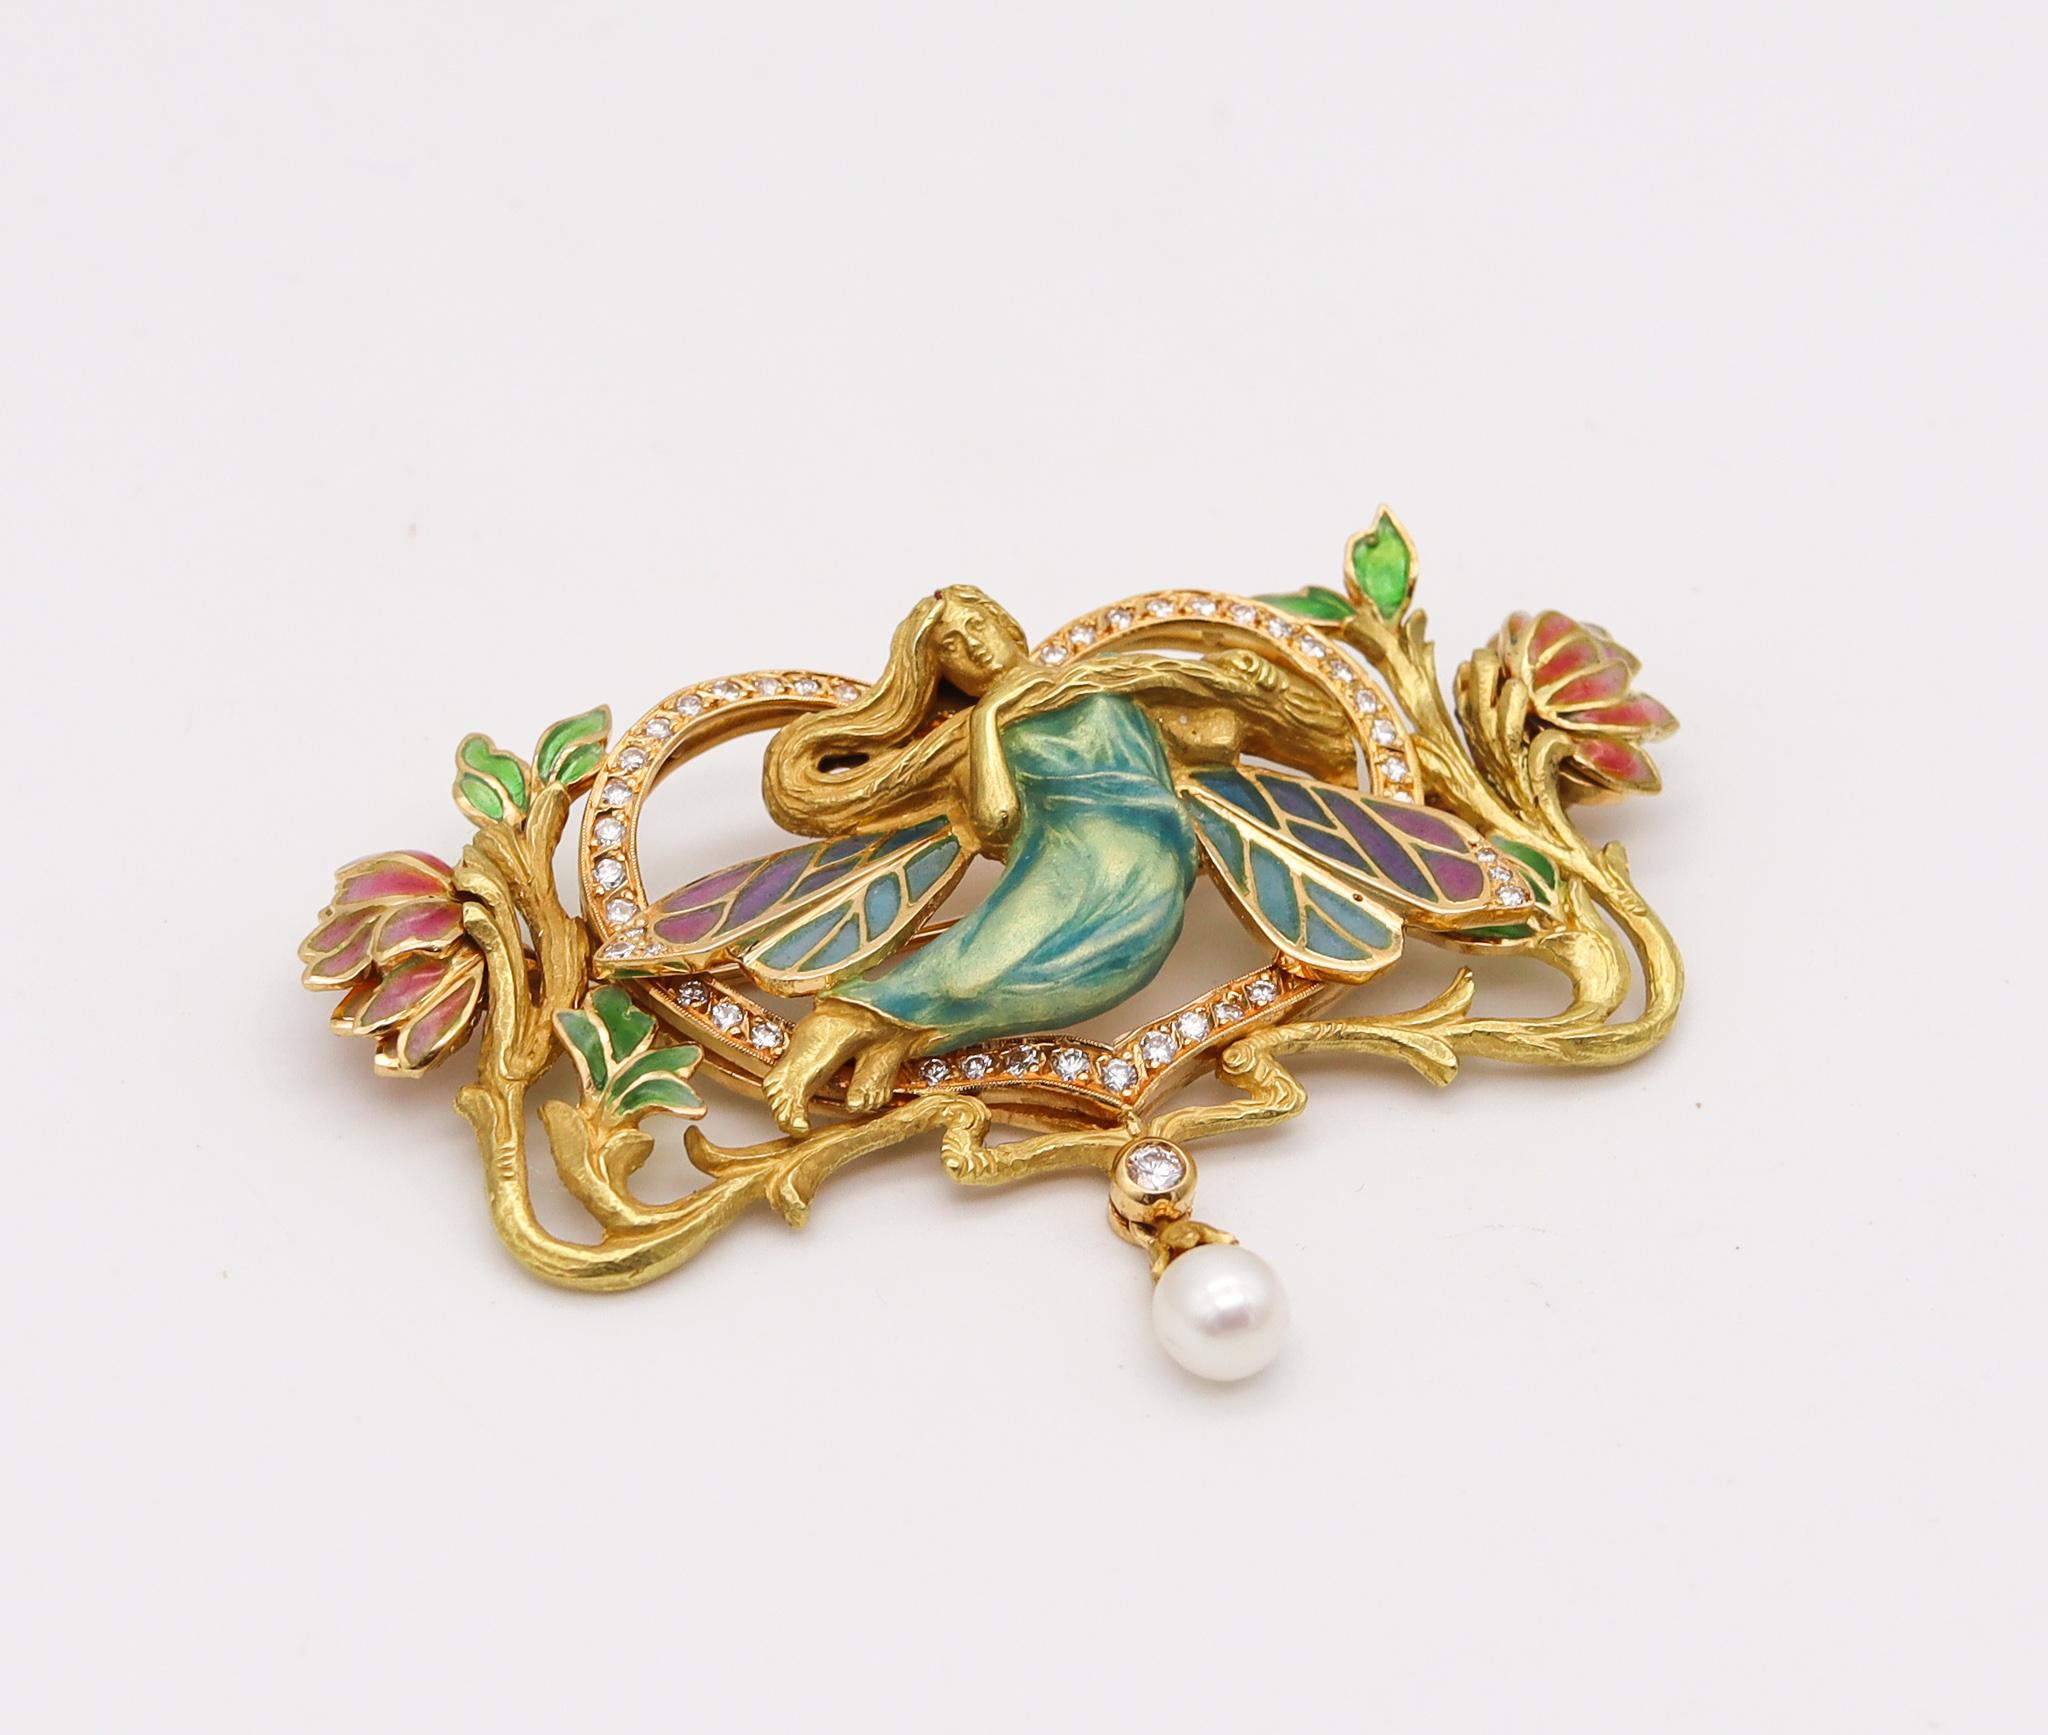 An art nouveau enameled convertible brooch designed by Masriera.

Colorful piece, created in Barcelona Spain by the jewelry designer Gloria Masriera for Masriera y Carreras. This beautiful brooch has been crafted with art nouveau revival patterns in